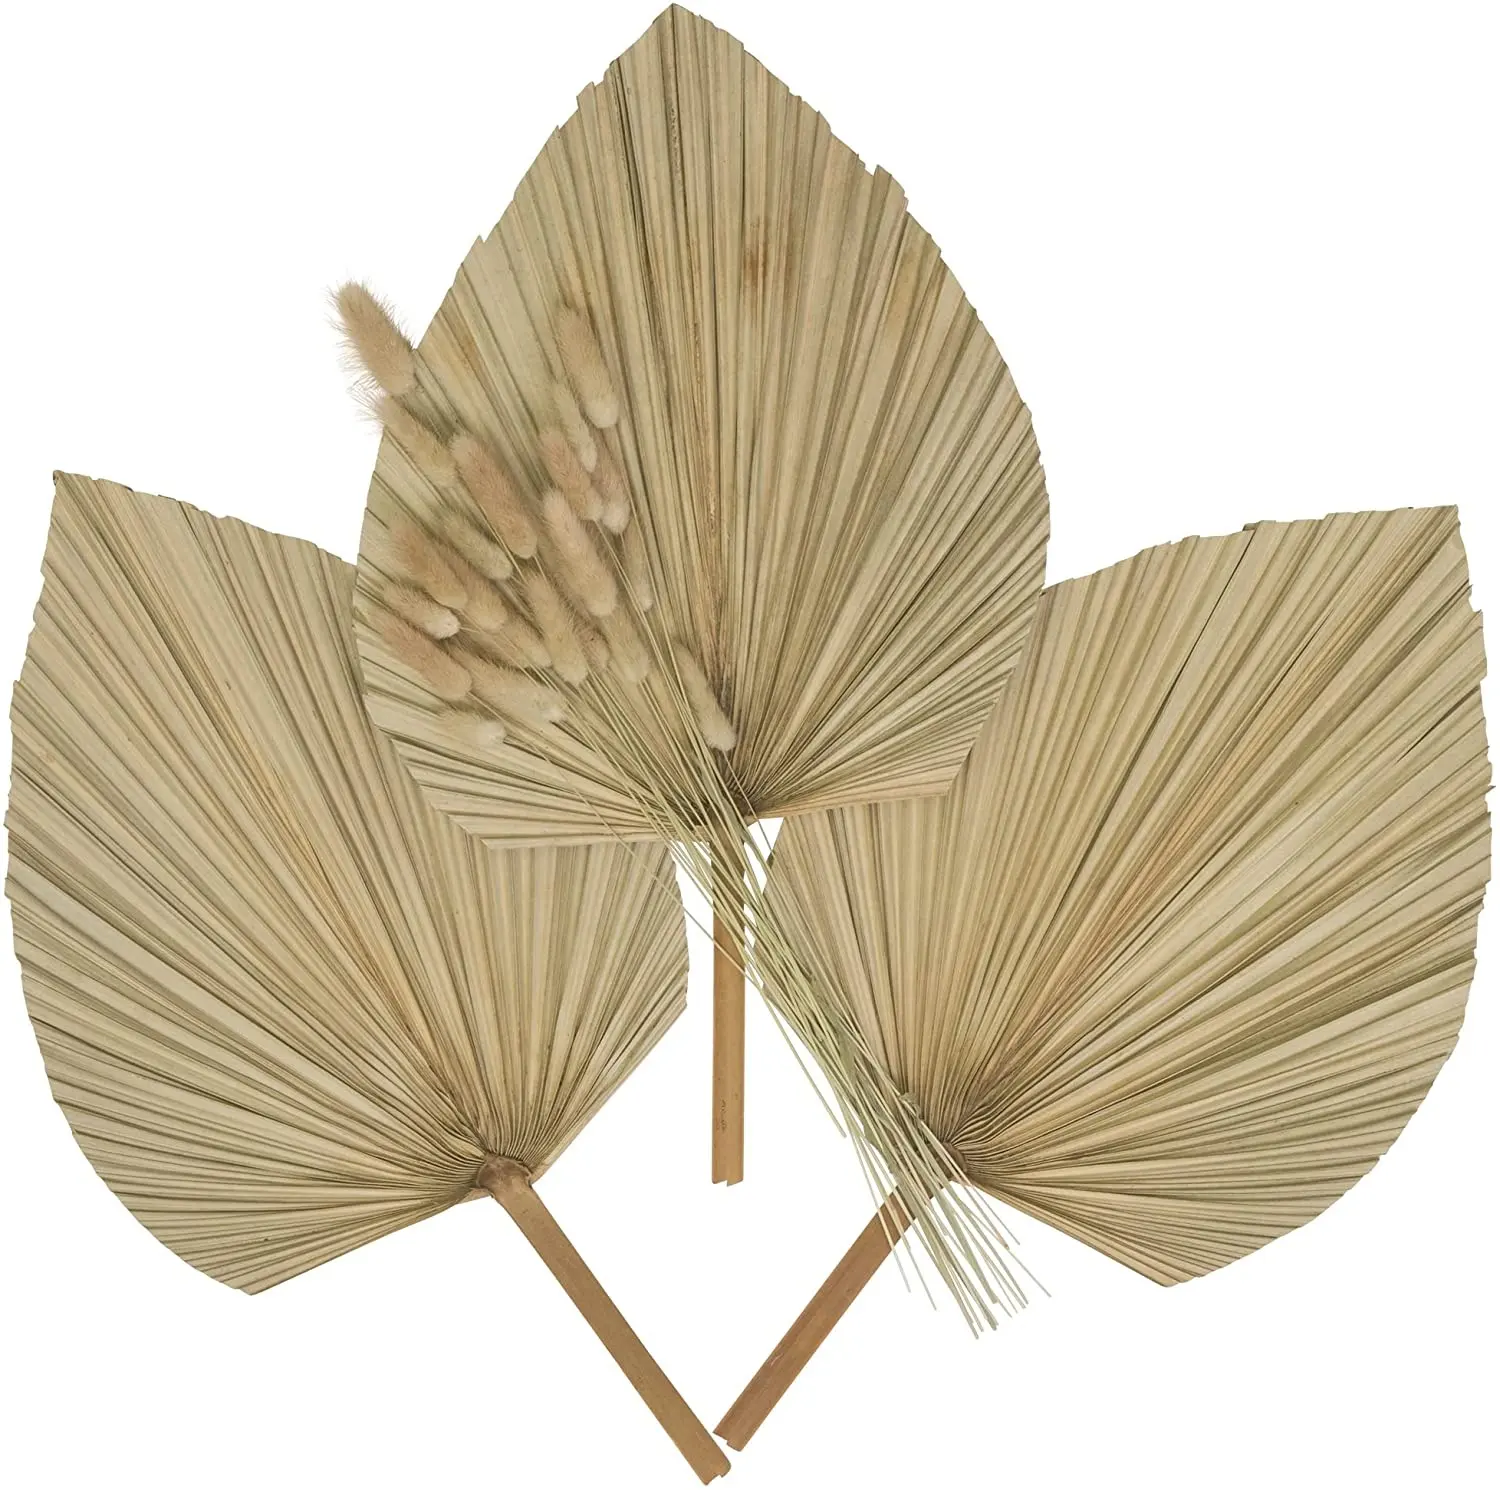 Amazon Hot Selling Boho Decor Natural Flowers Pampas Dries Dry Heart Leaf Beige Plants Dried Palm Leaves